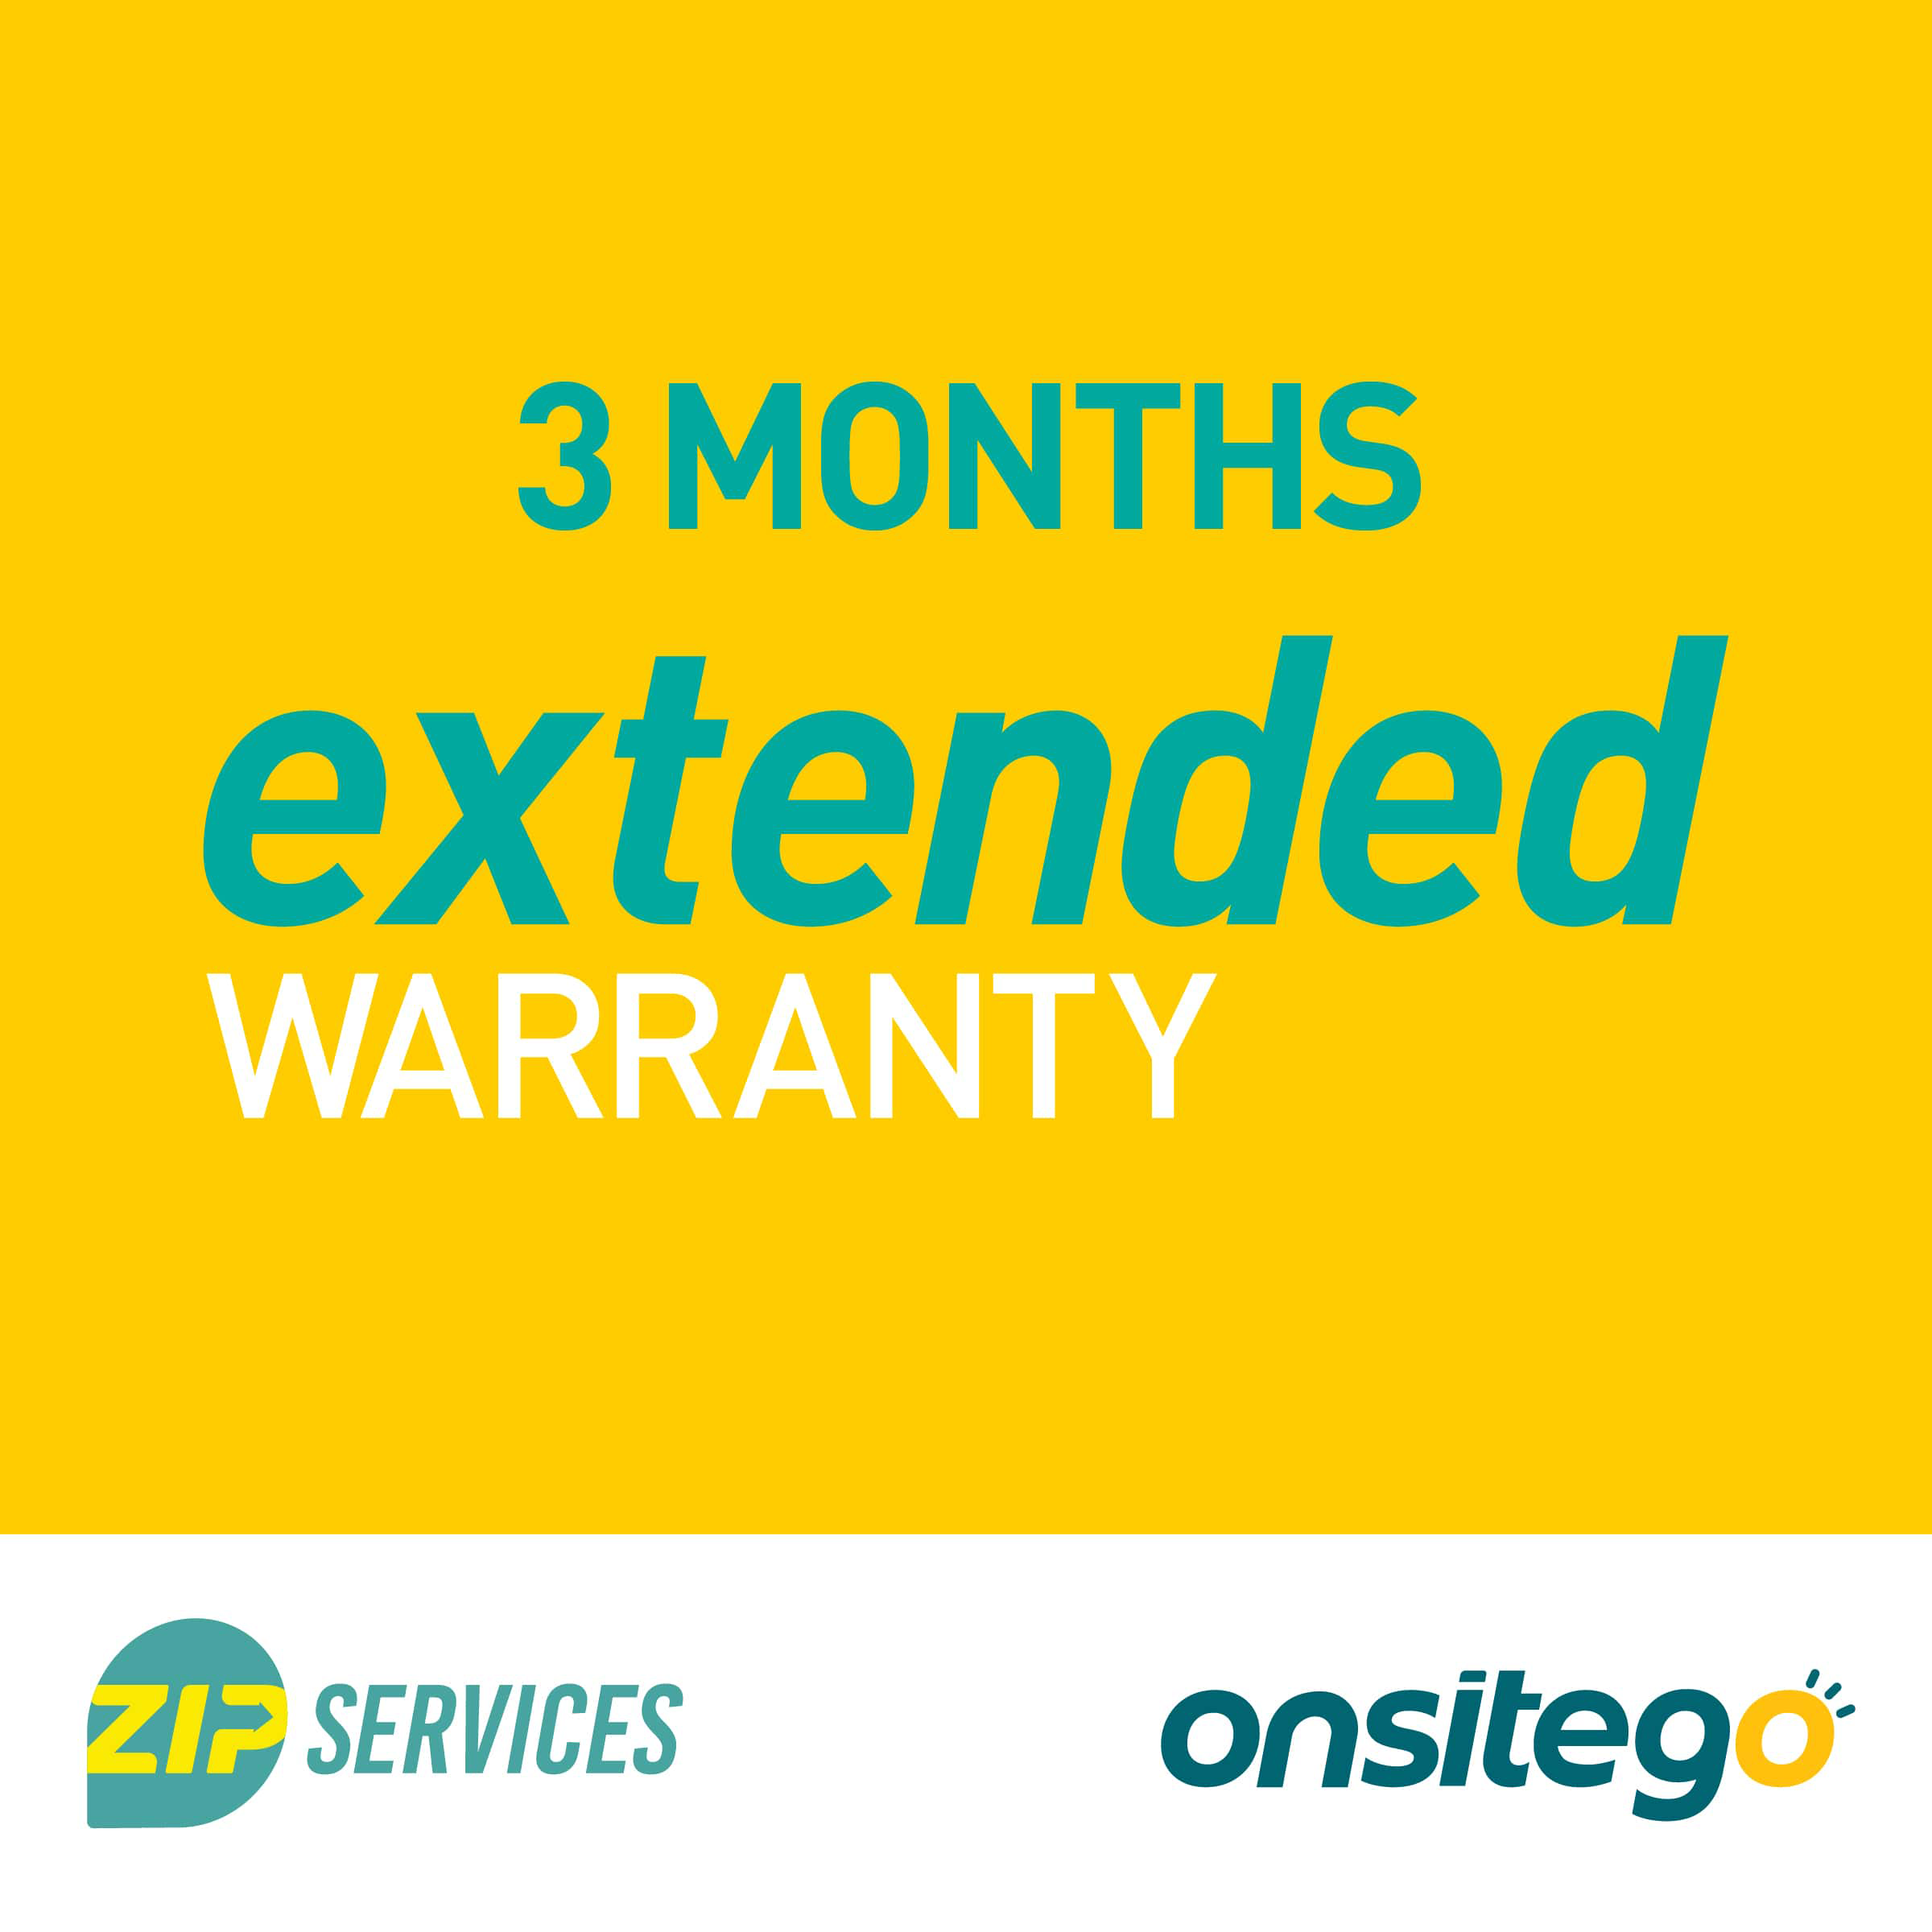 OnsiteGo 3 Months Extended Warranty for PC Accessory  Rs.8001 - Rs.9000_1